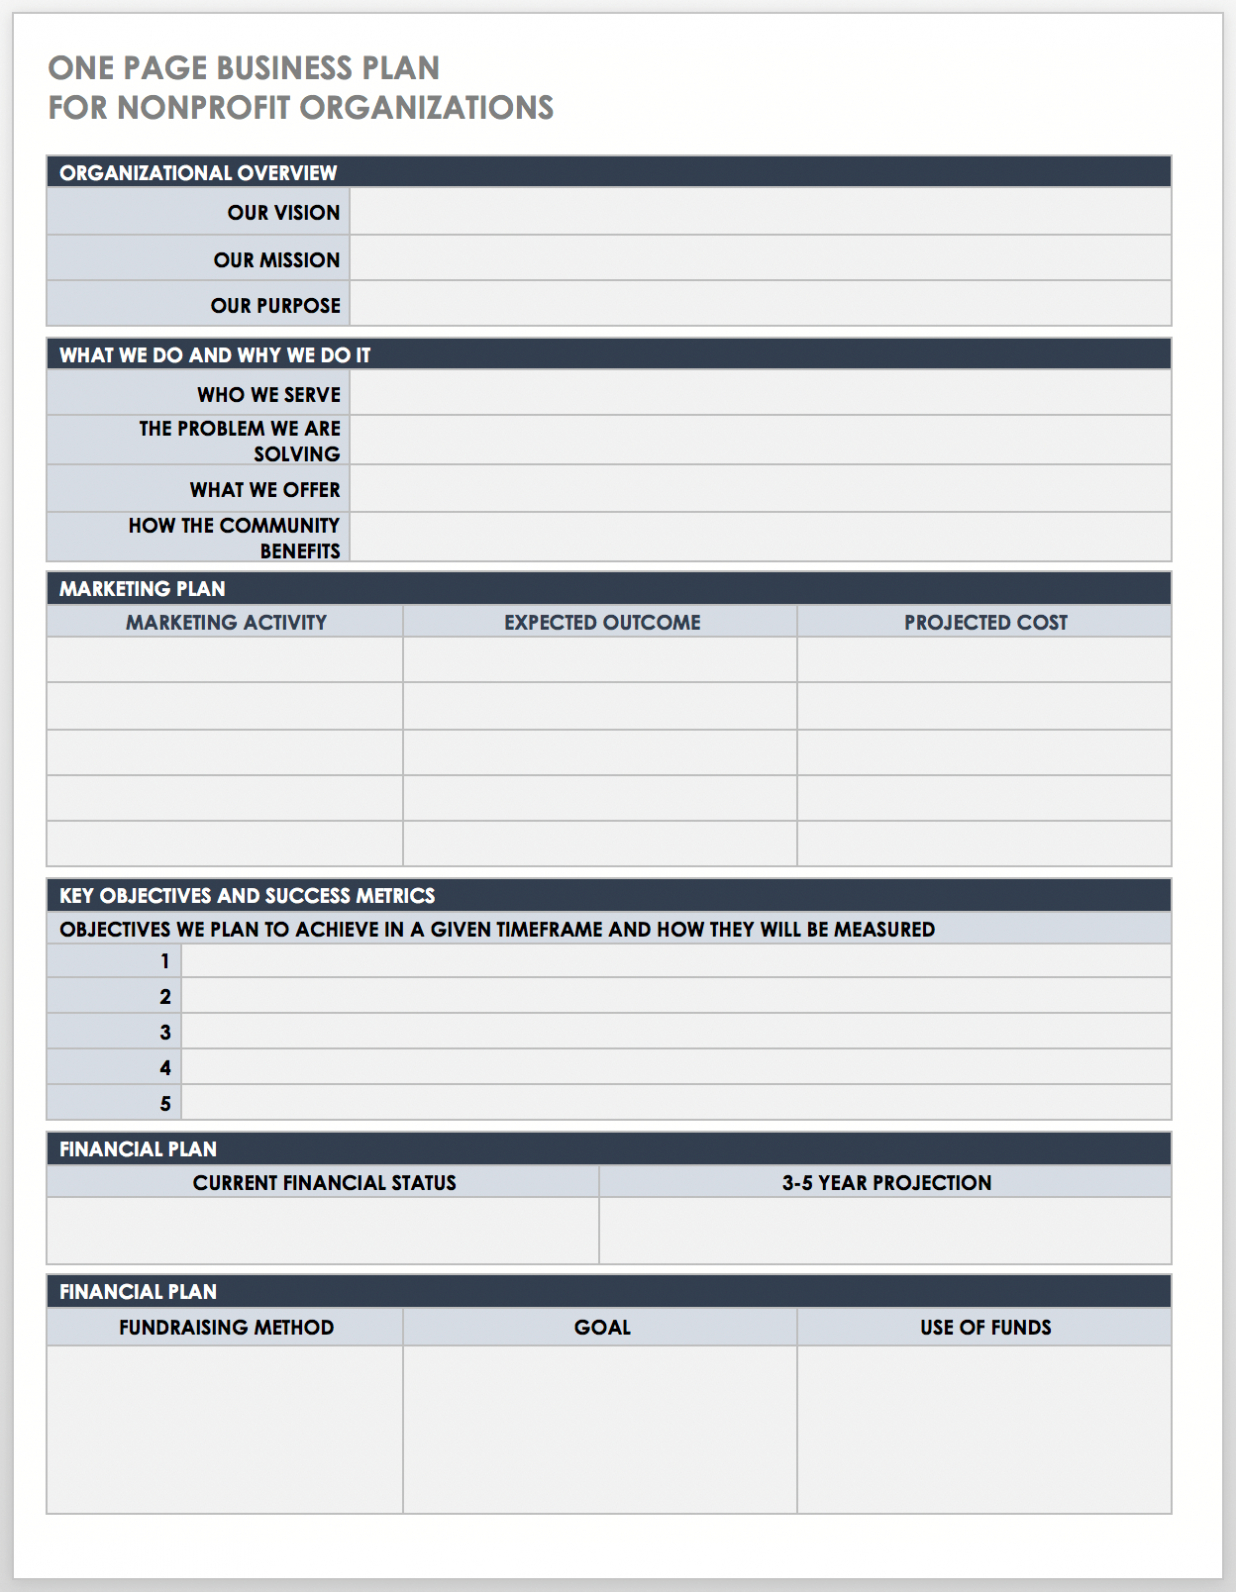 Free One-Page Business Plan Templates | Smartsheet throughout Non Profit Business Plan Template Free Download